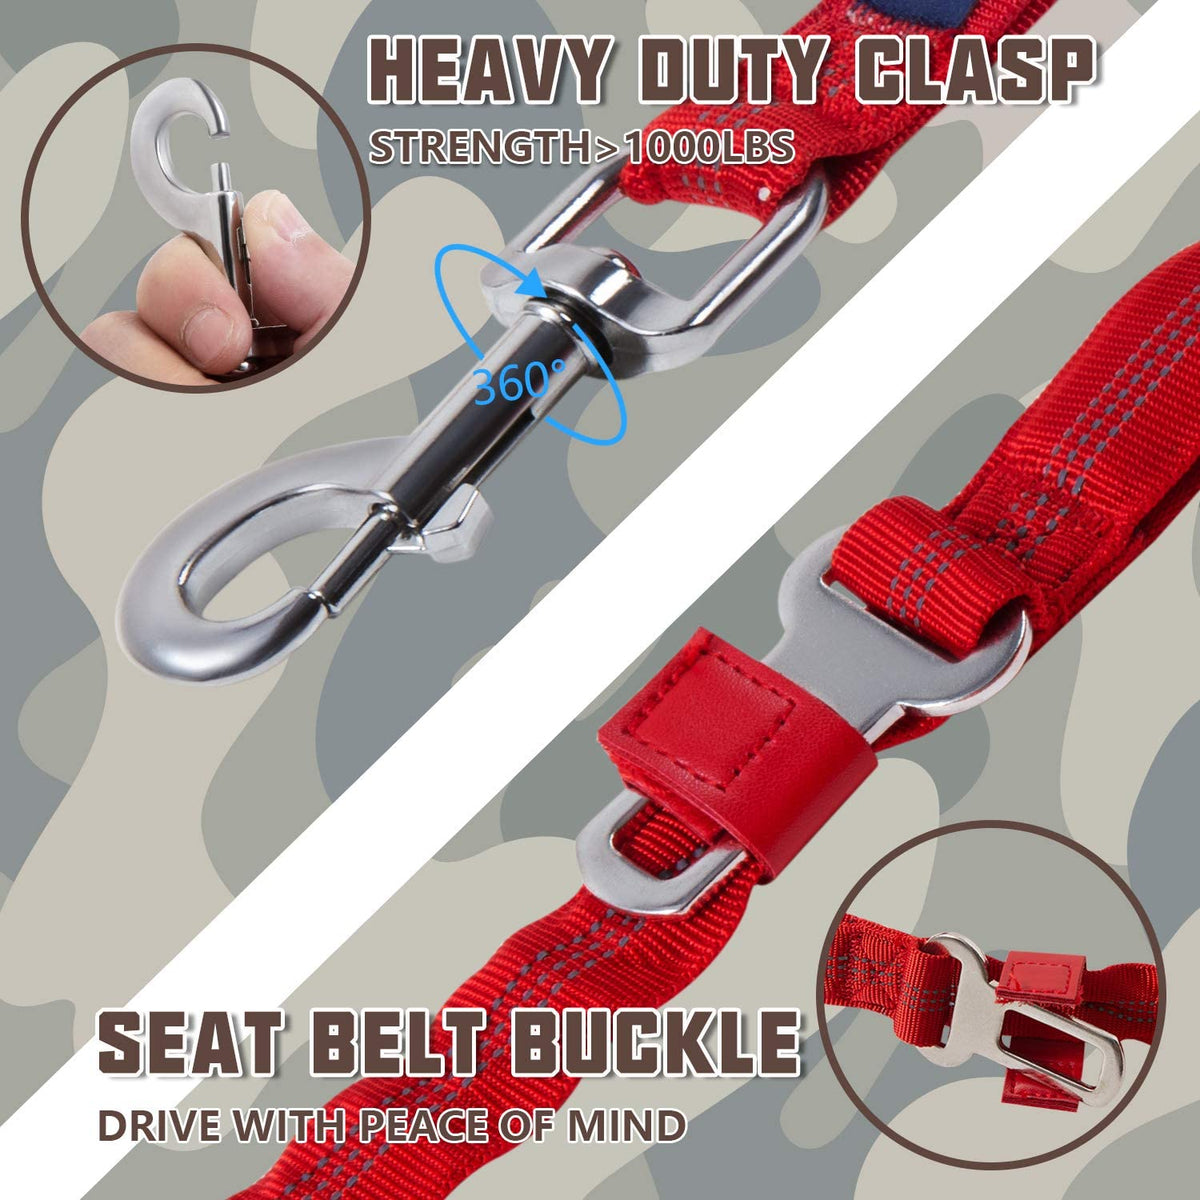 Auroth Dog Leash - Heavy Duty Bungee Tactical & Training Leash for Large Dogs - Red - aurothpets